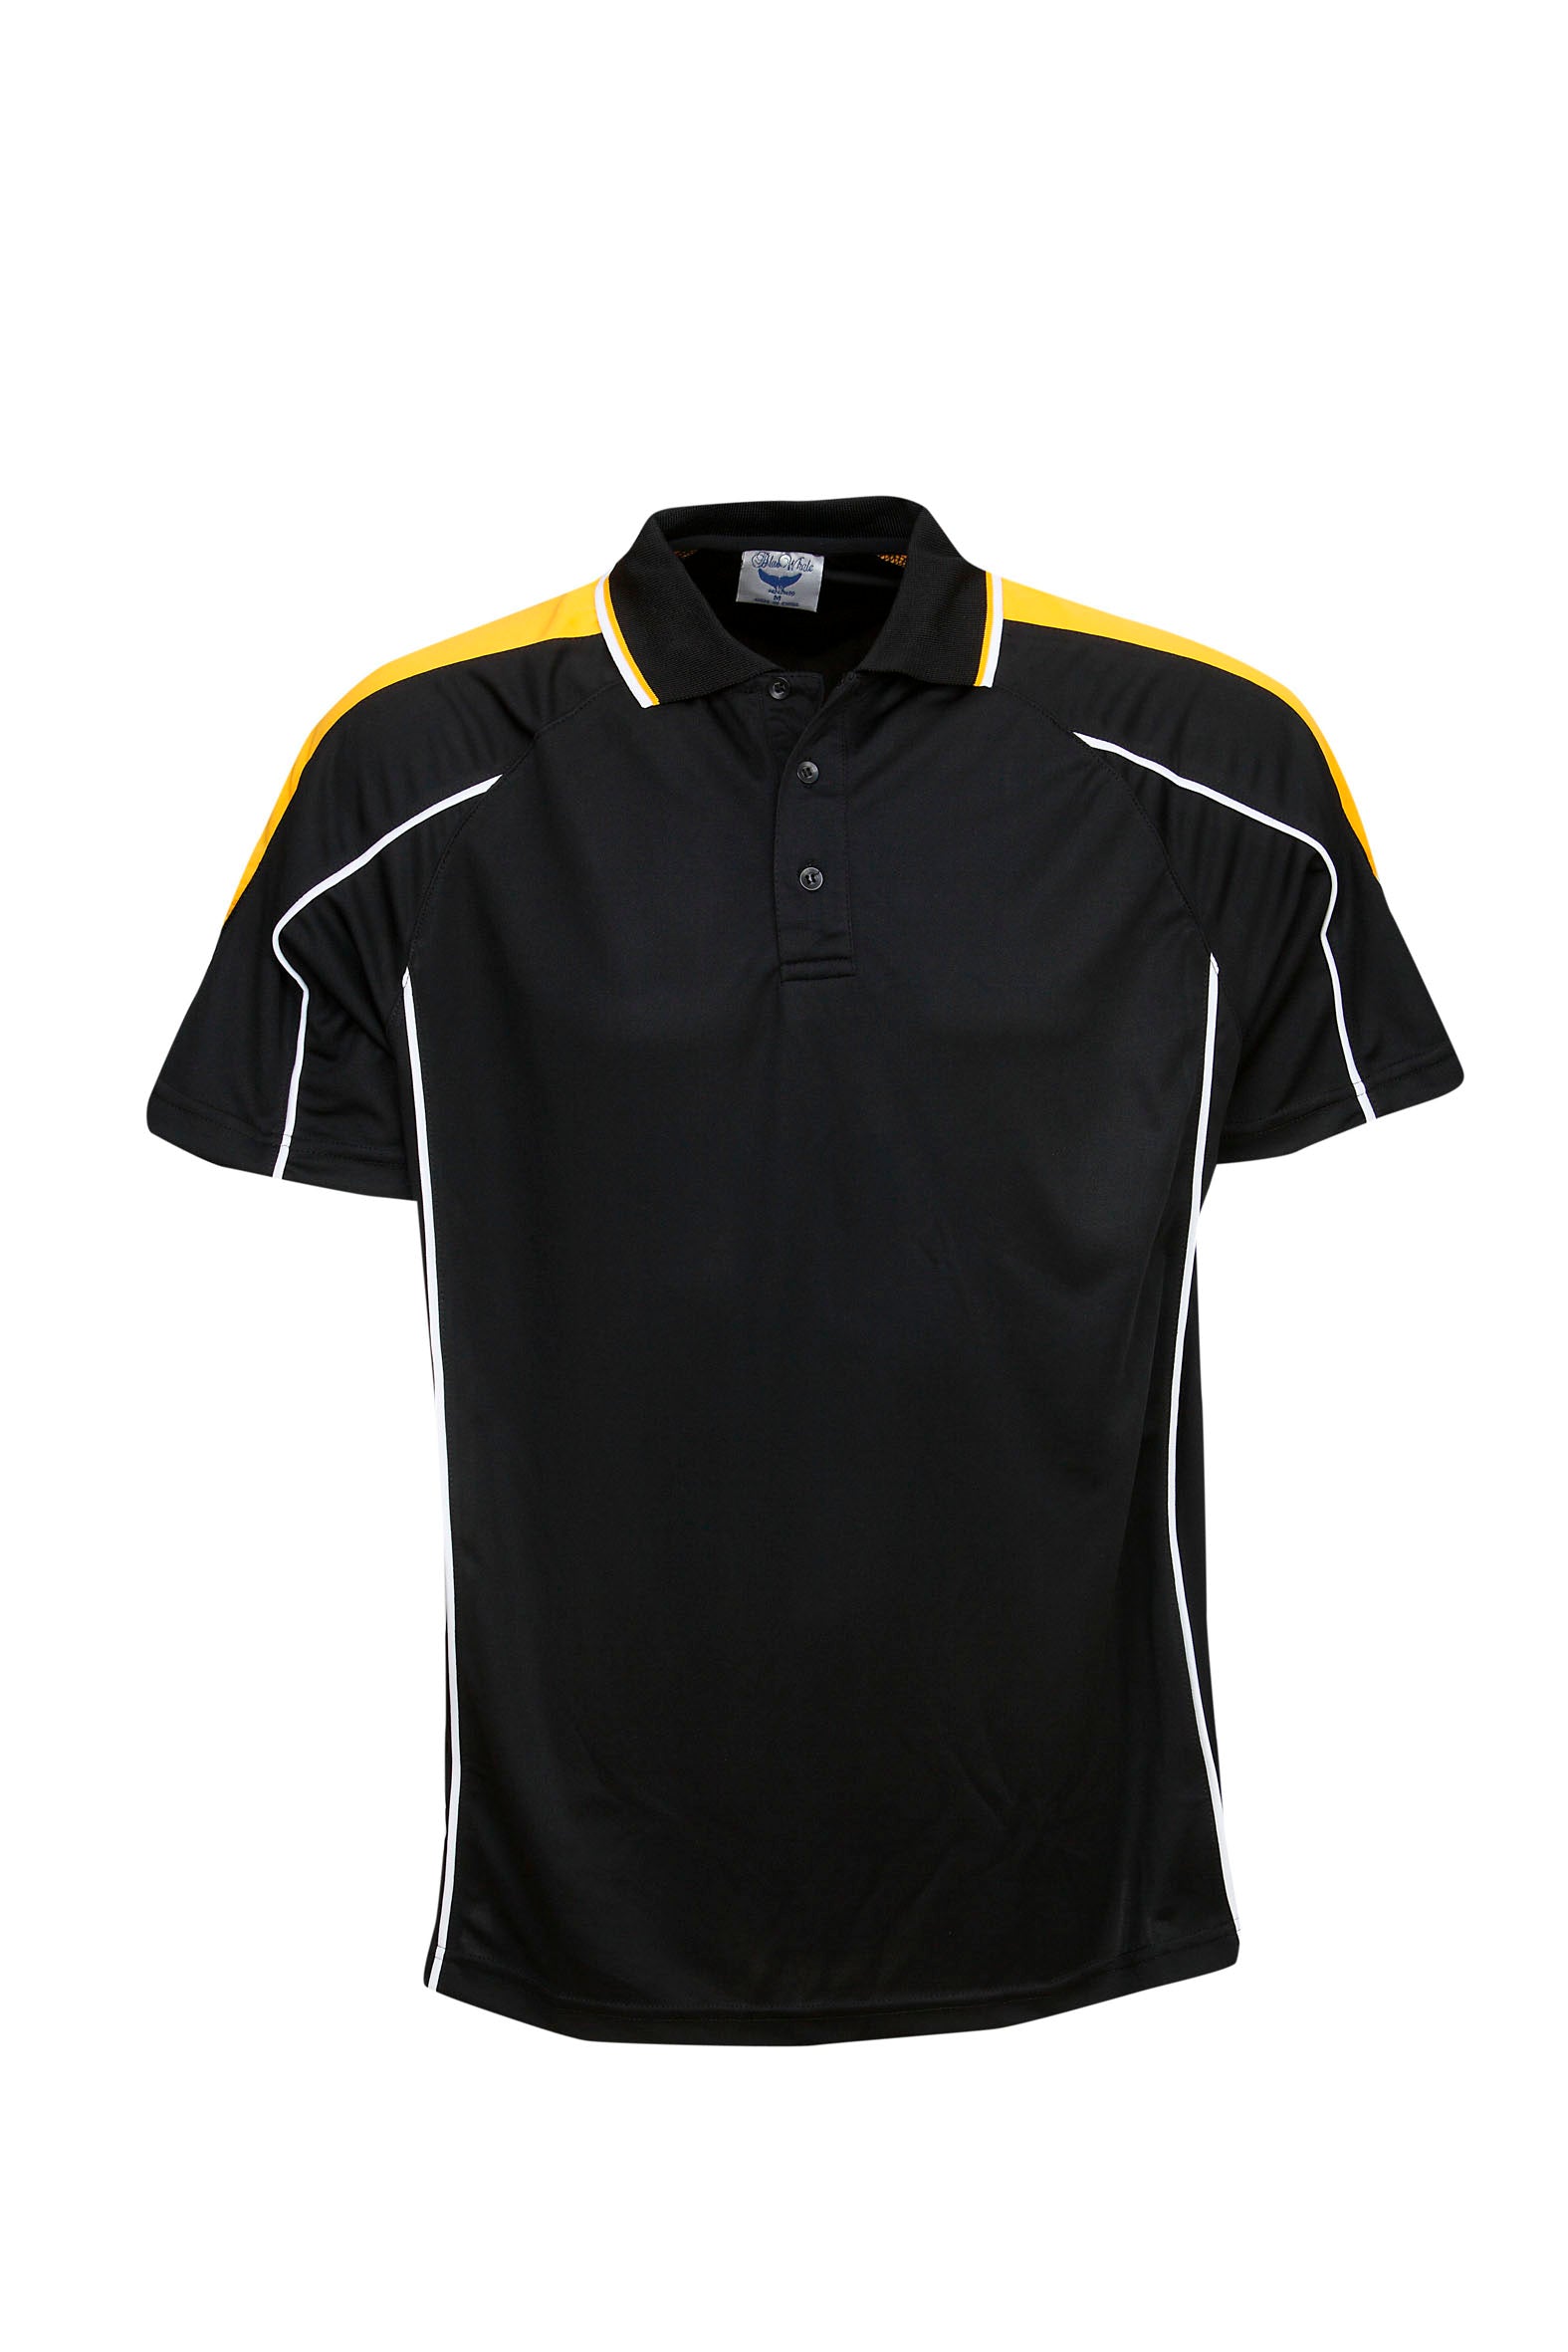 12 Pack P44 Black/Gold Polos | Front Embroidery OR Back Vinyl Included